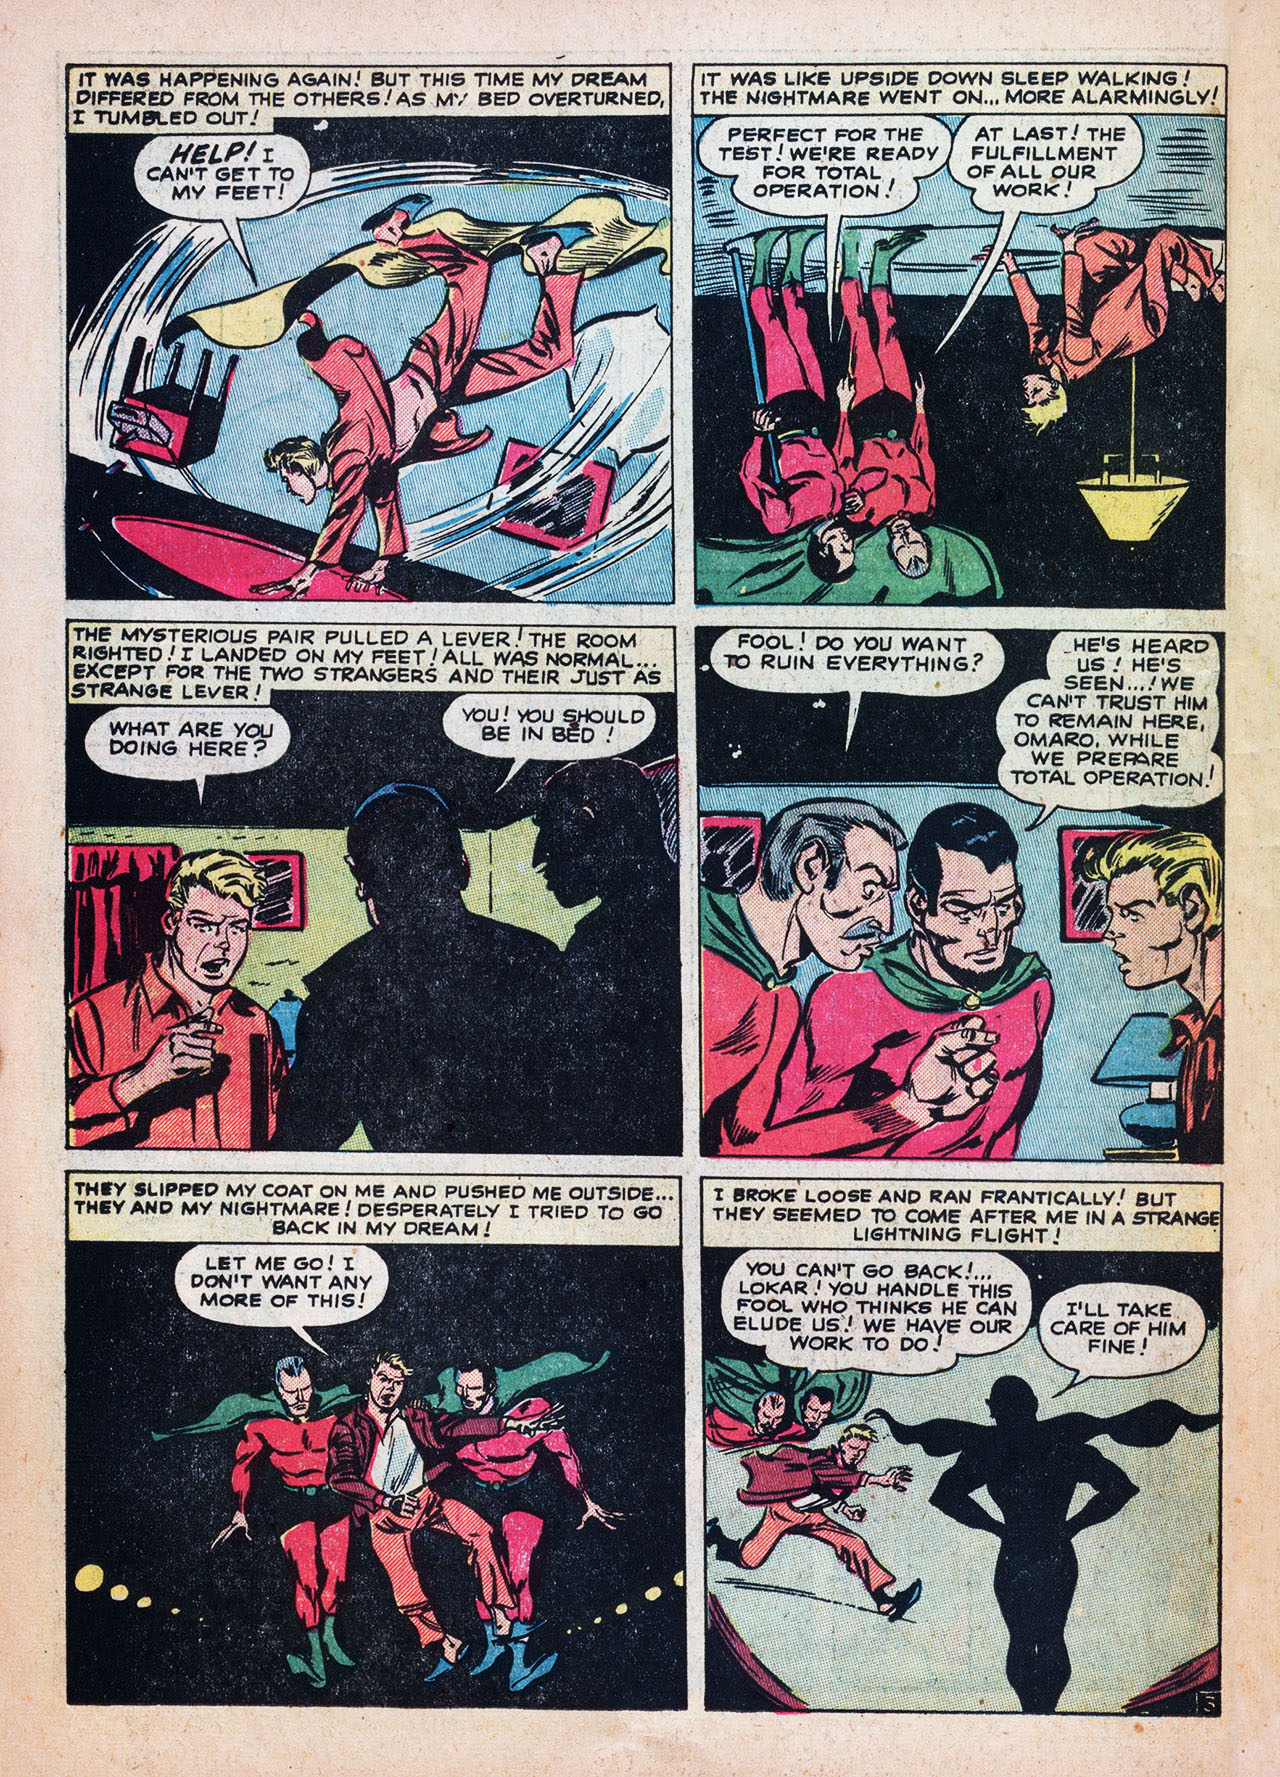 Marvel Tales (1949) 102 Page 13